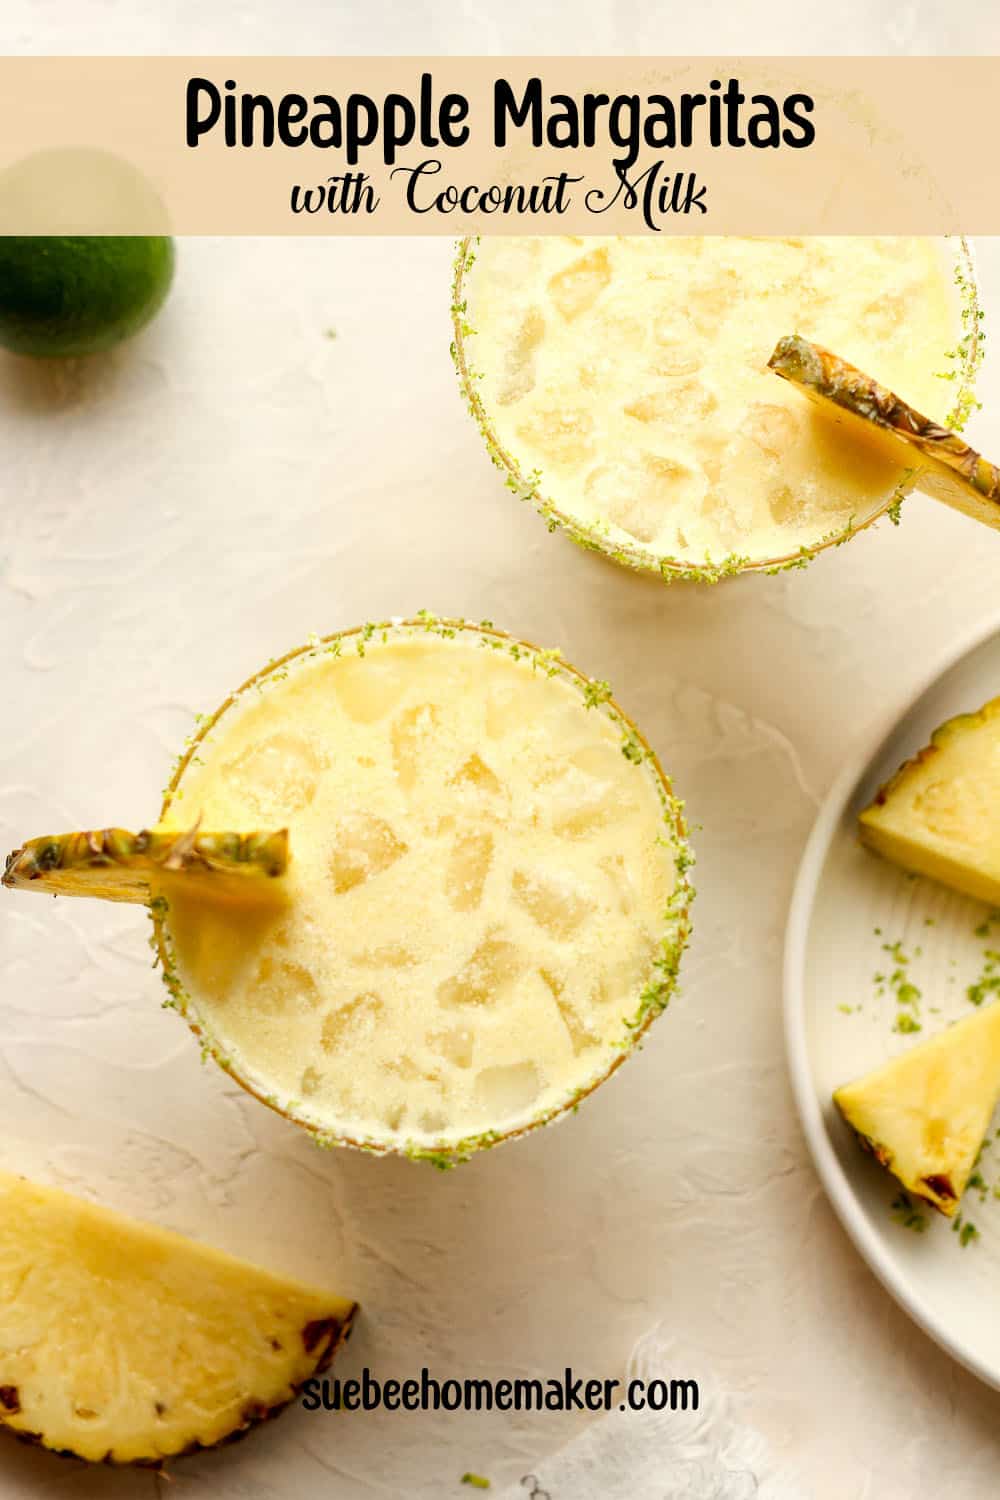 Overhead view of two pineapple margaritas with coconut milk.